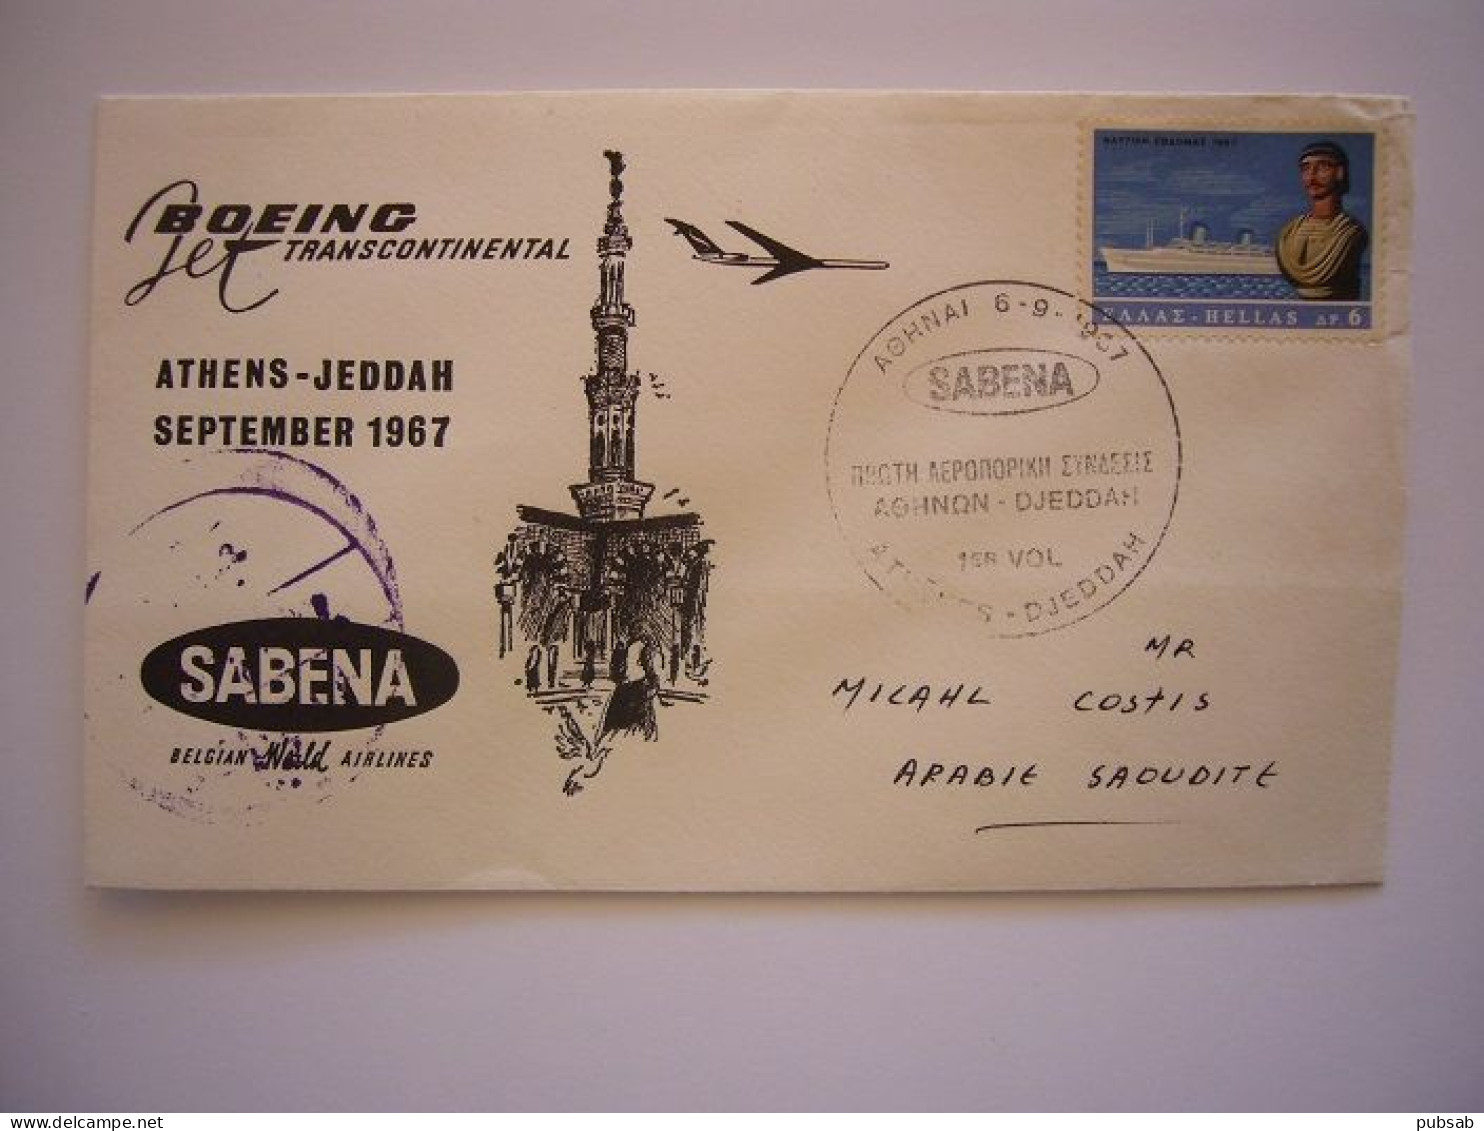 Avion / Airplane / SABENA / Boeing 707 /  From Athens To Jeddah / Sep 6, 1967 - Covers & Documents